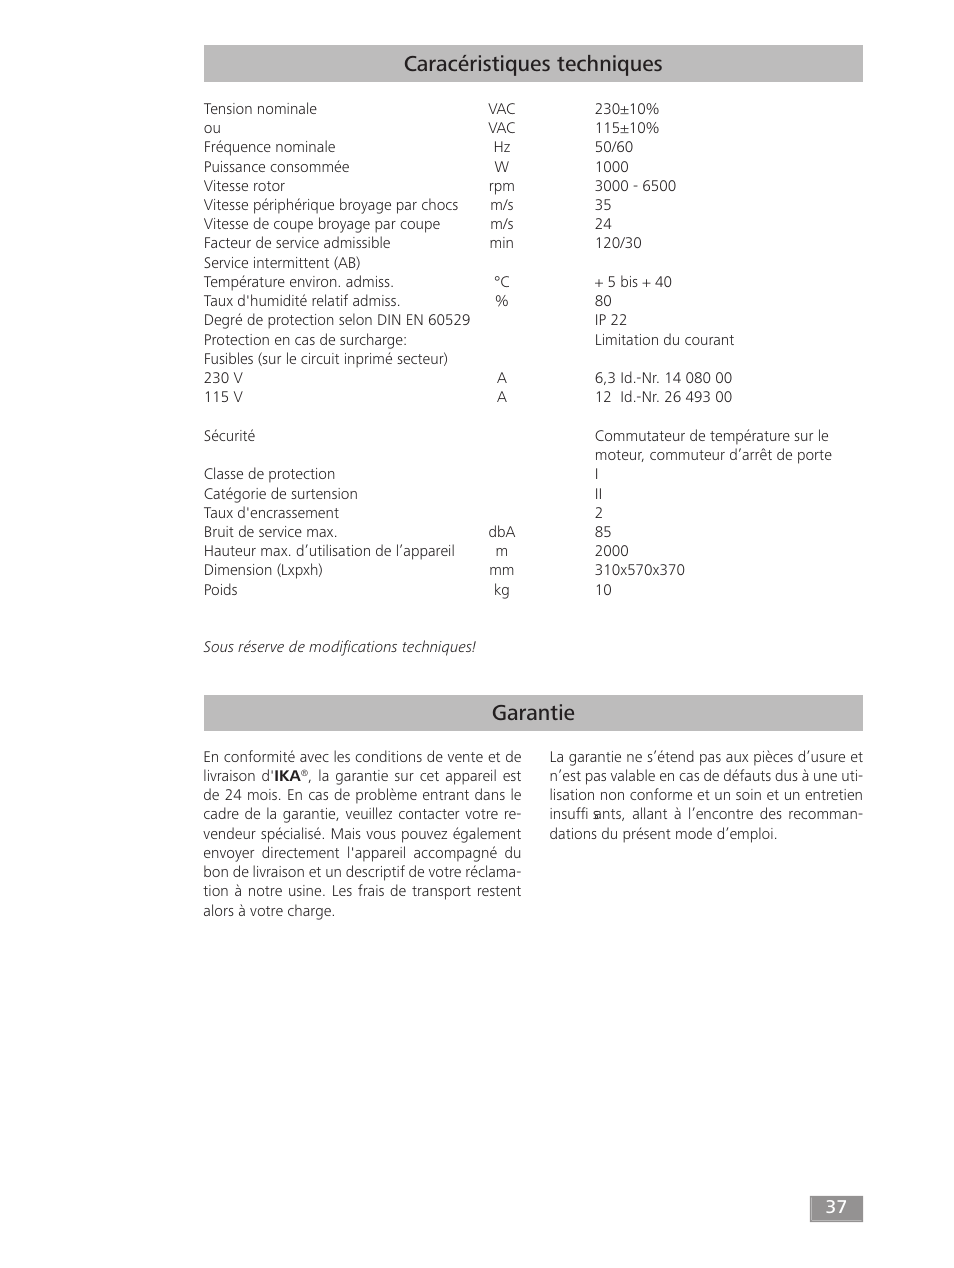 Garantie caracéristiques techniques | IKA MF 10 basic User Manual | Page 37 / 140